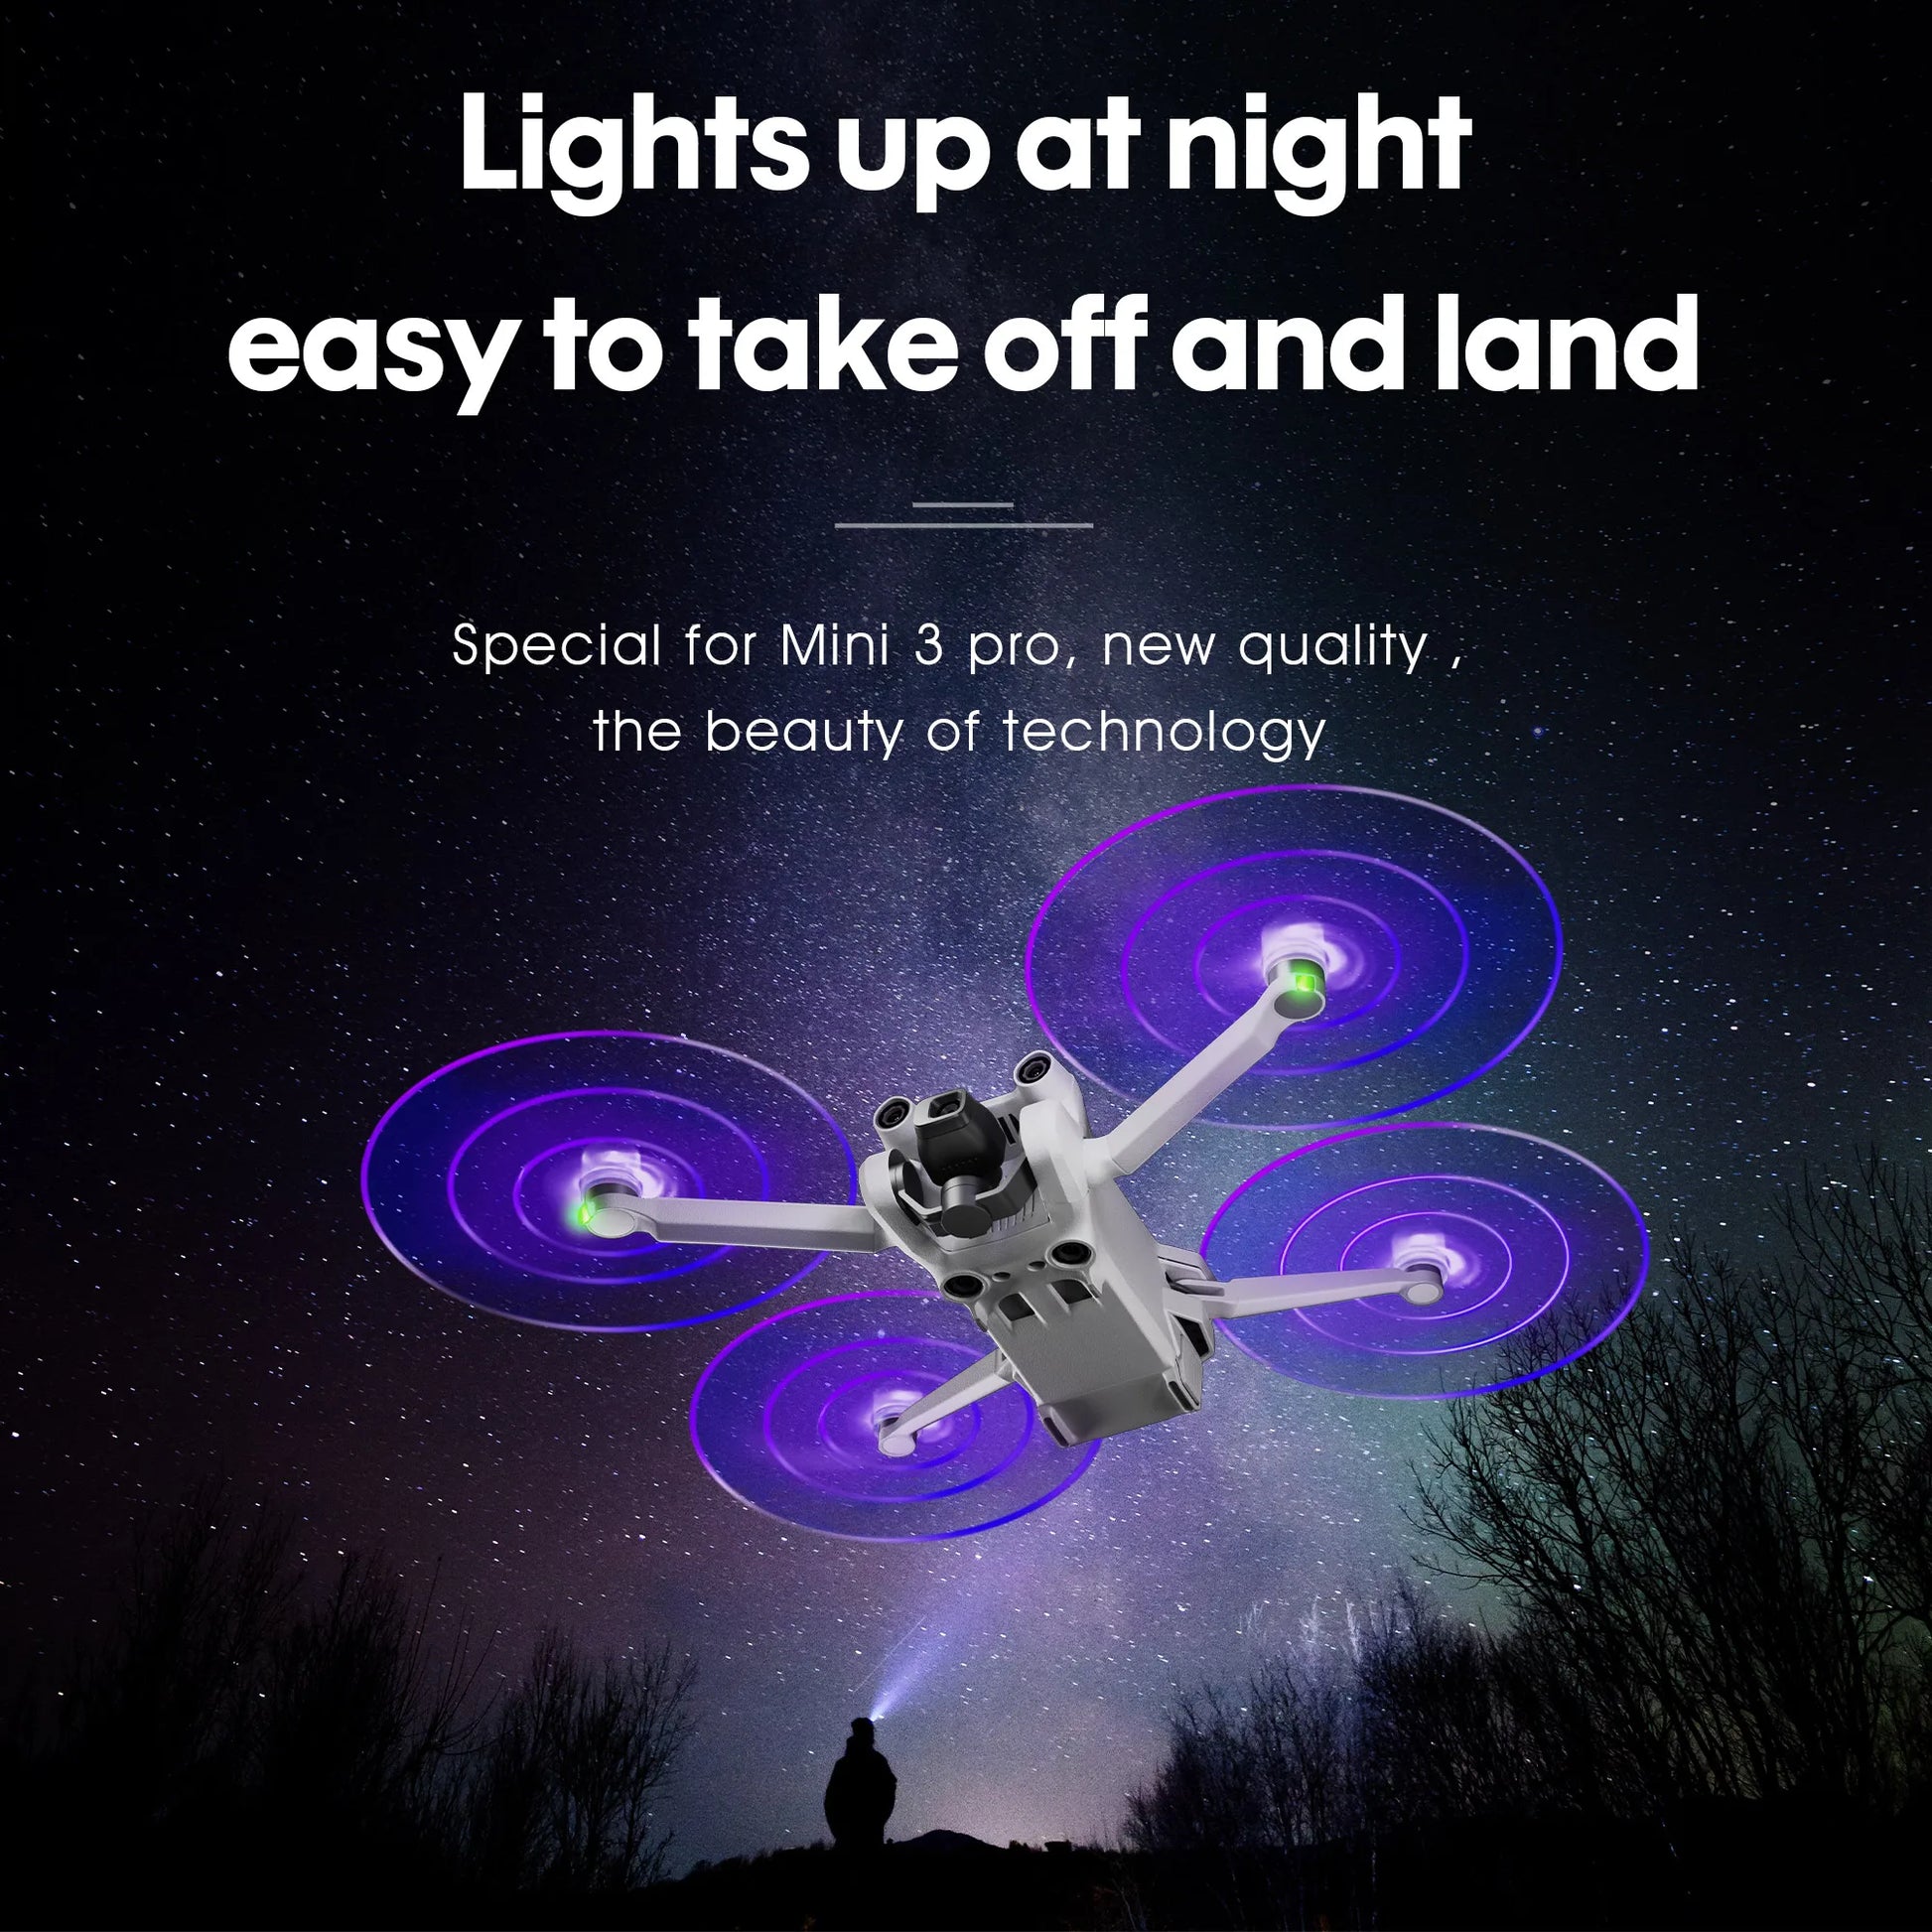 LED Light Flash Propeller, Lights up at night easy to take off and land Special for Mini 3 pro, new quality